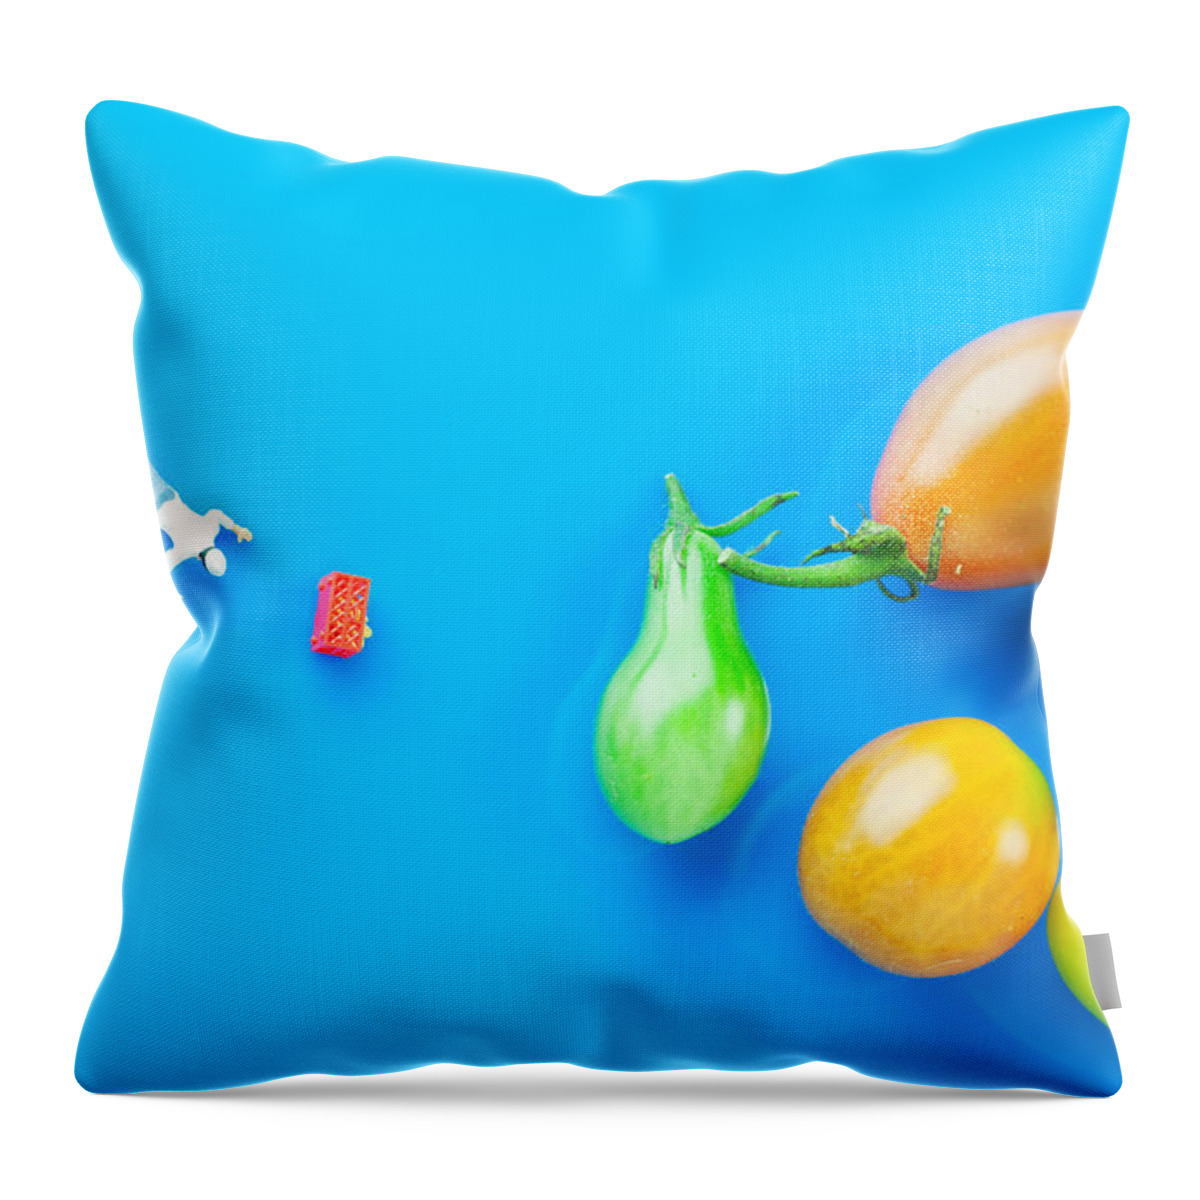 Chef Throw Pillow featuring the painting Chef Tumbled In Front Of Colorful Tomatoes II Little People On Food by Paul Ge